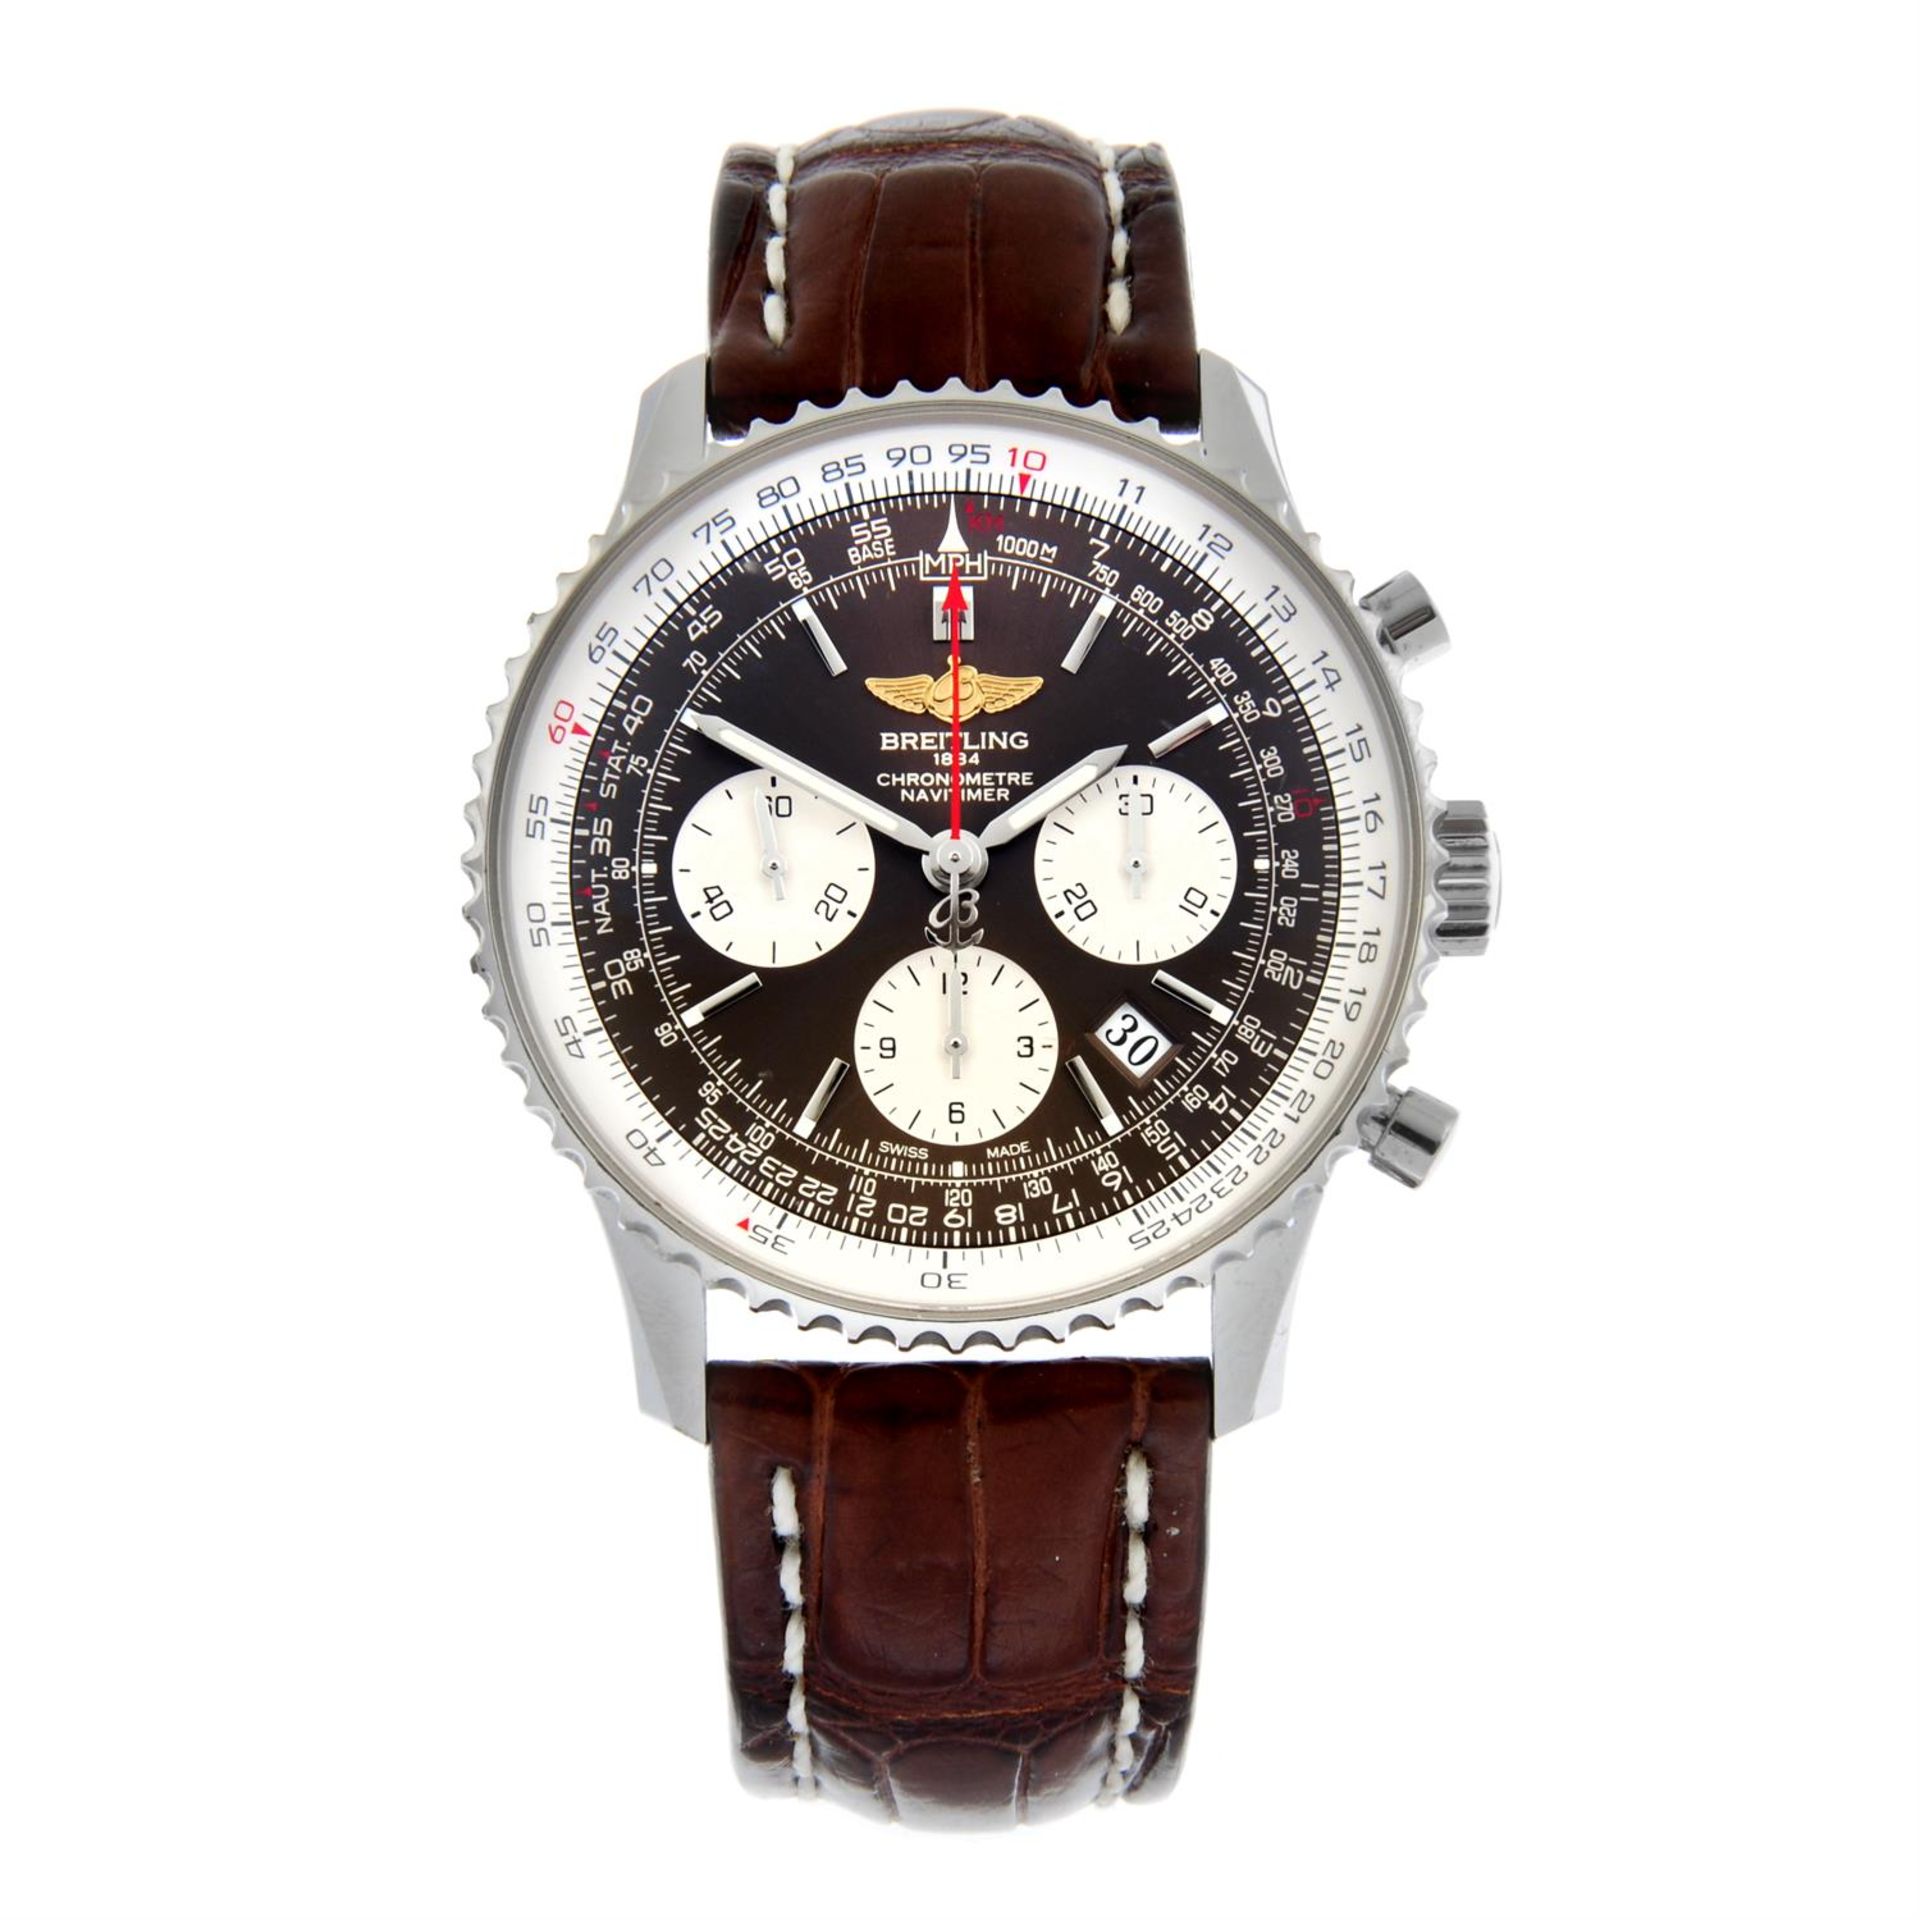 BREITLING - a limited edition stainless steel Navitimer chronograph wrist watch, 42mm.